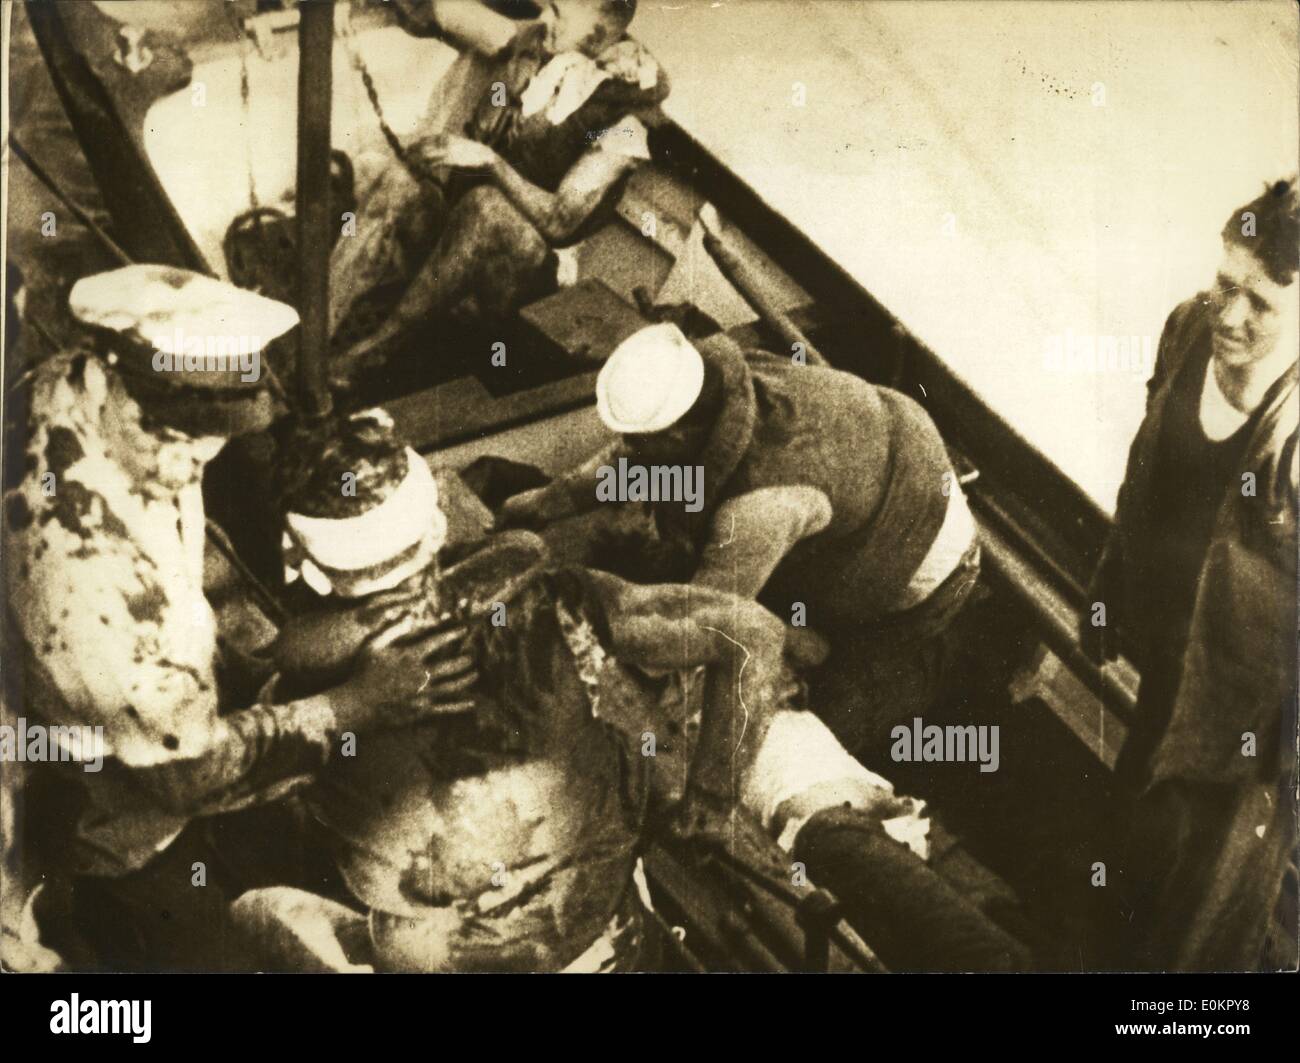 Dec. 12, 1937 - Nanjing, China - The USS Panay incident was a Japanese attack on the American gunboat Panay while she was anchored in the Yangtze River outside Nanking (now known as Nanjing). Stock Photo